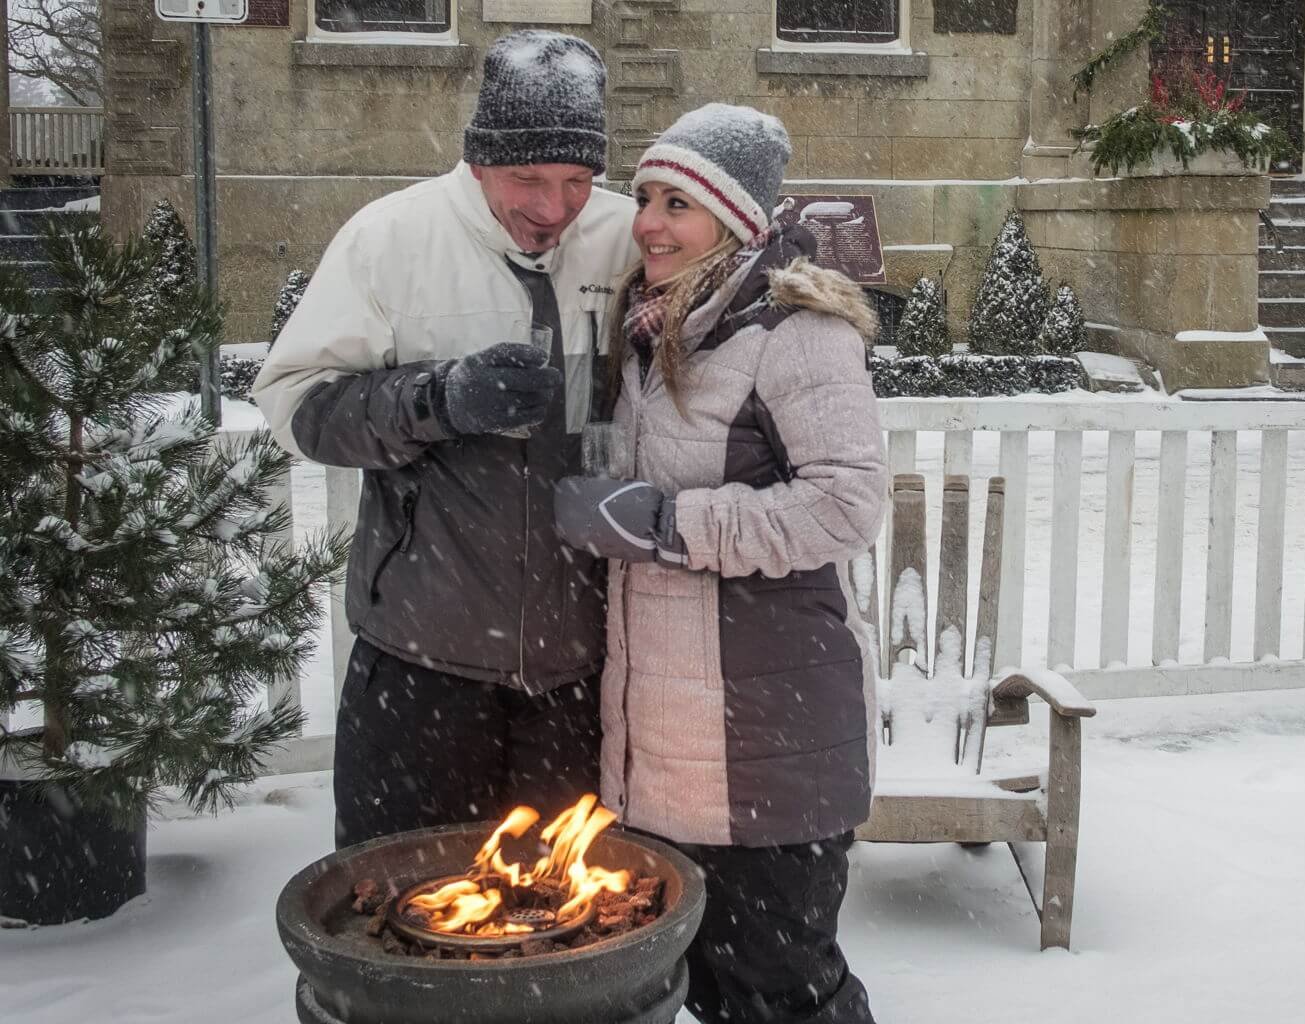 Man and woman in winter coats standing by firepit outdoors